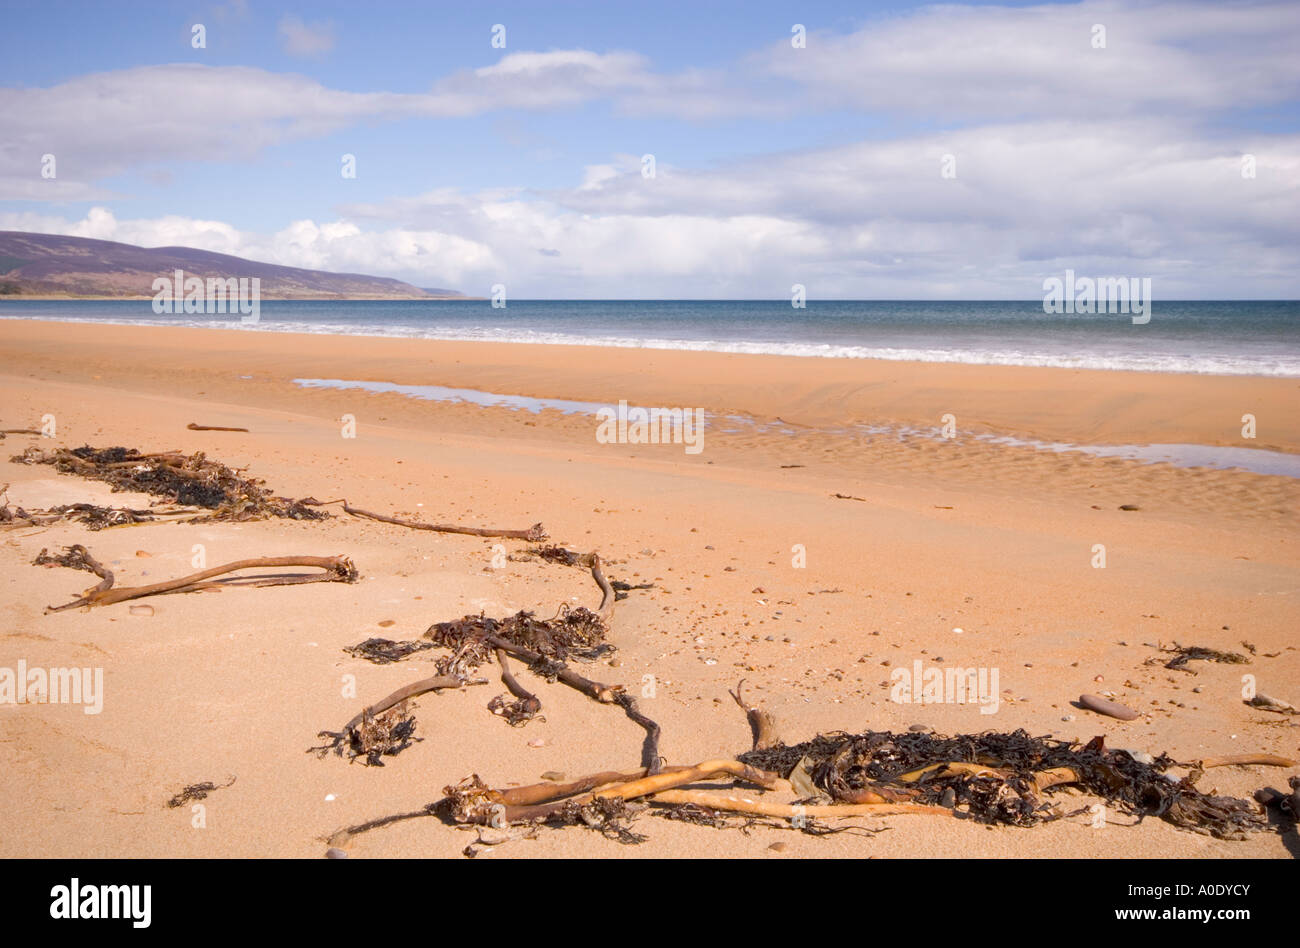 DESERTED SANDY BEACH SCENE WITH BLUE SKY AND SEA WEED WASHED UP ON BEACH Stock Photo